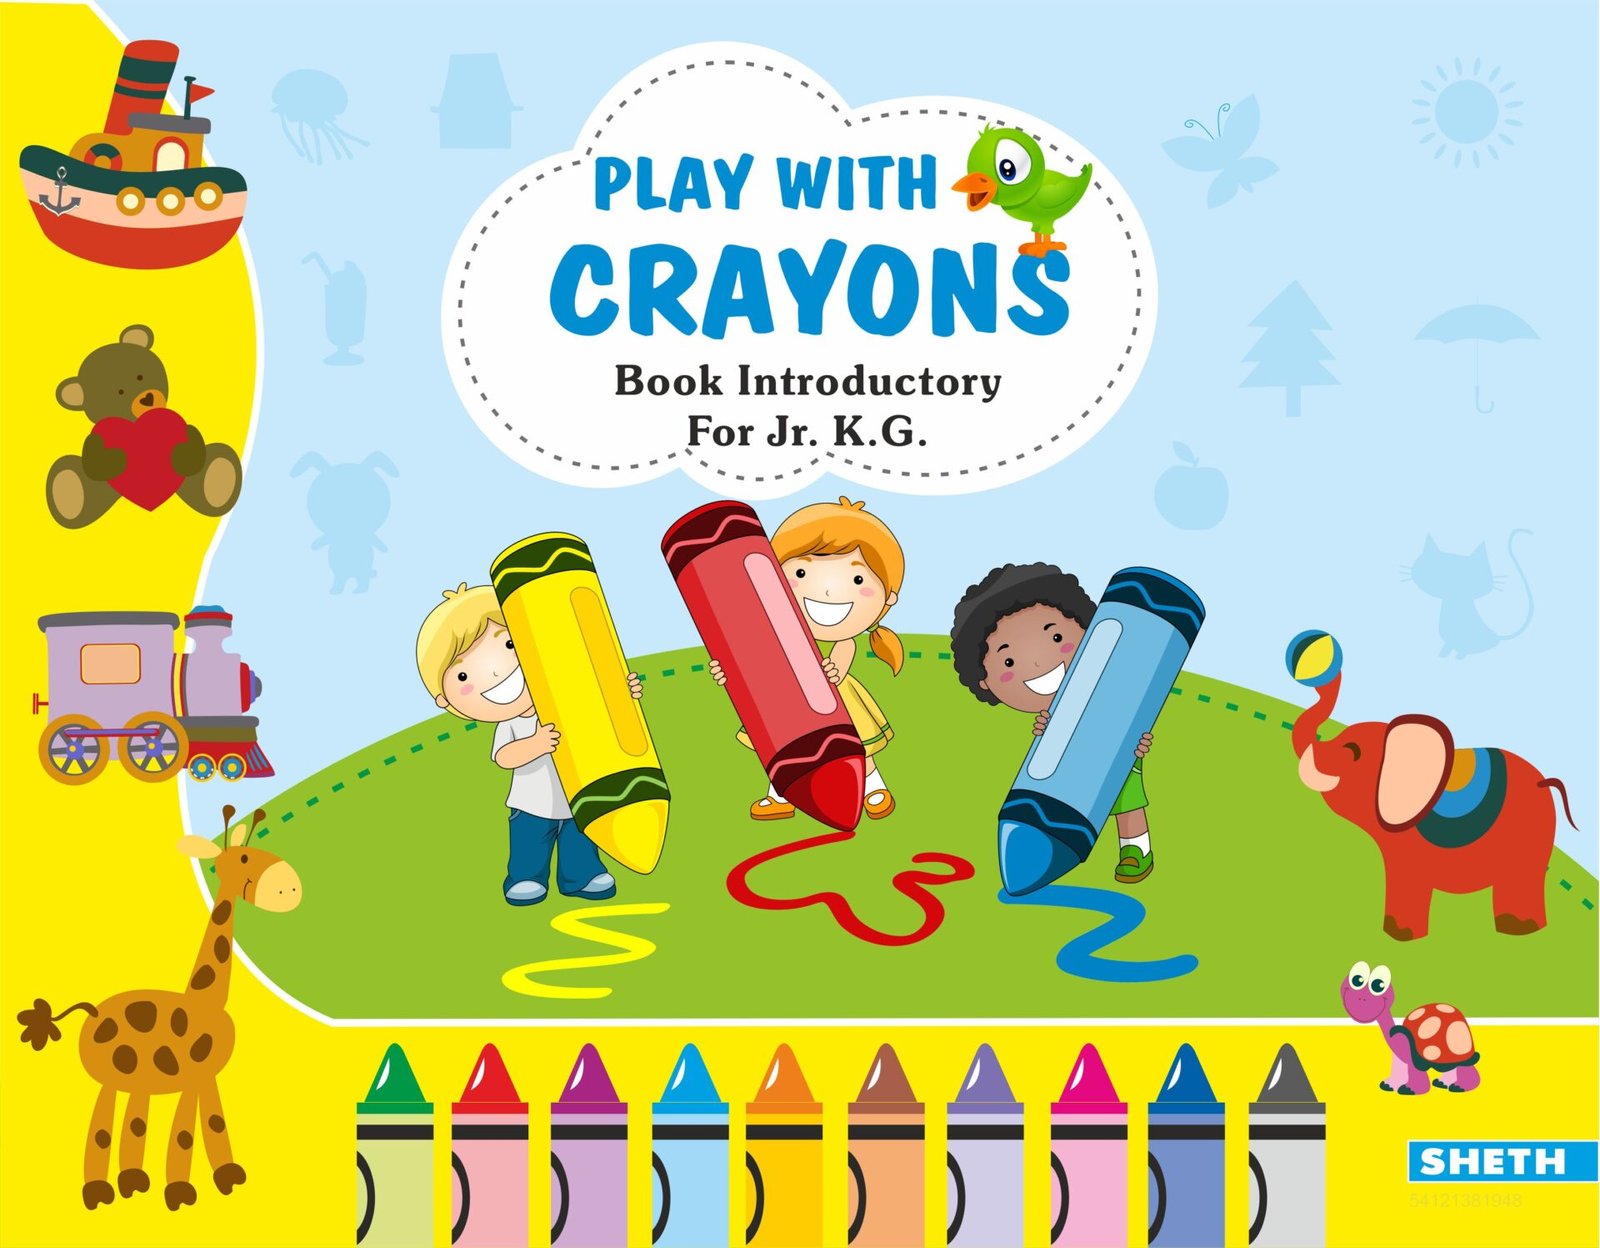 Sheth Books Play with Crayons Book Introductory for Jr. K.G 1